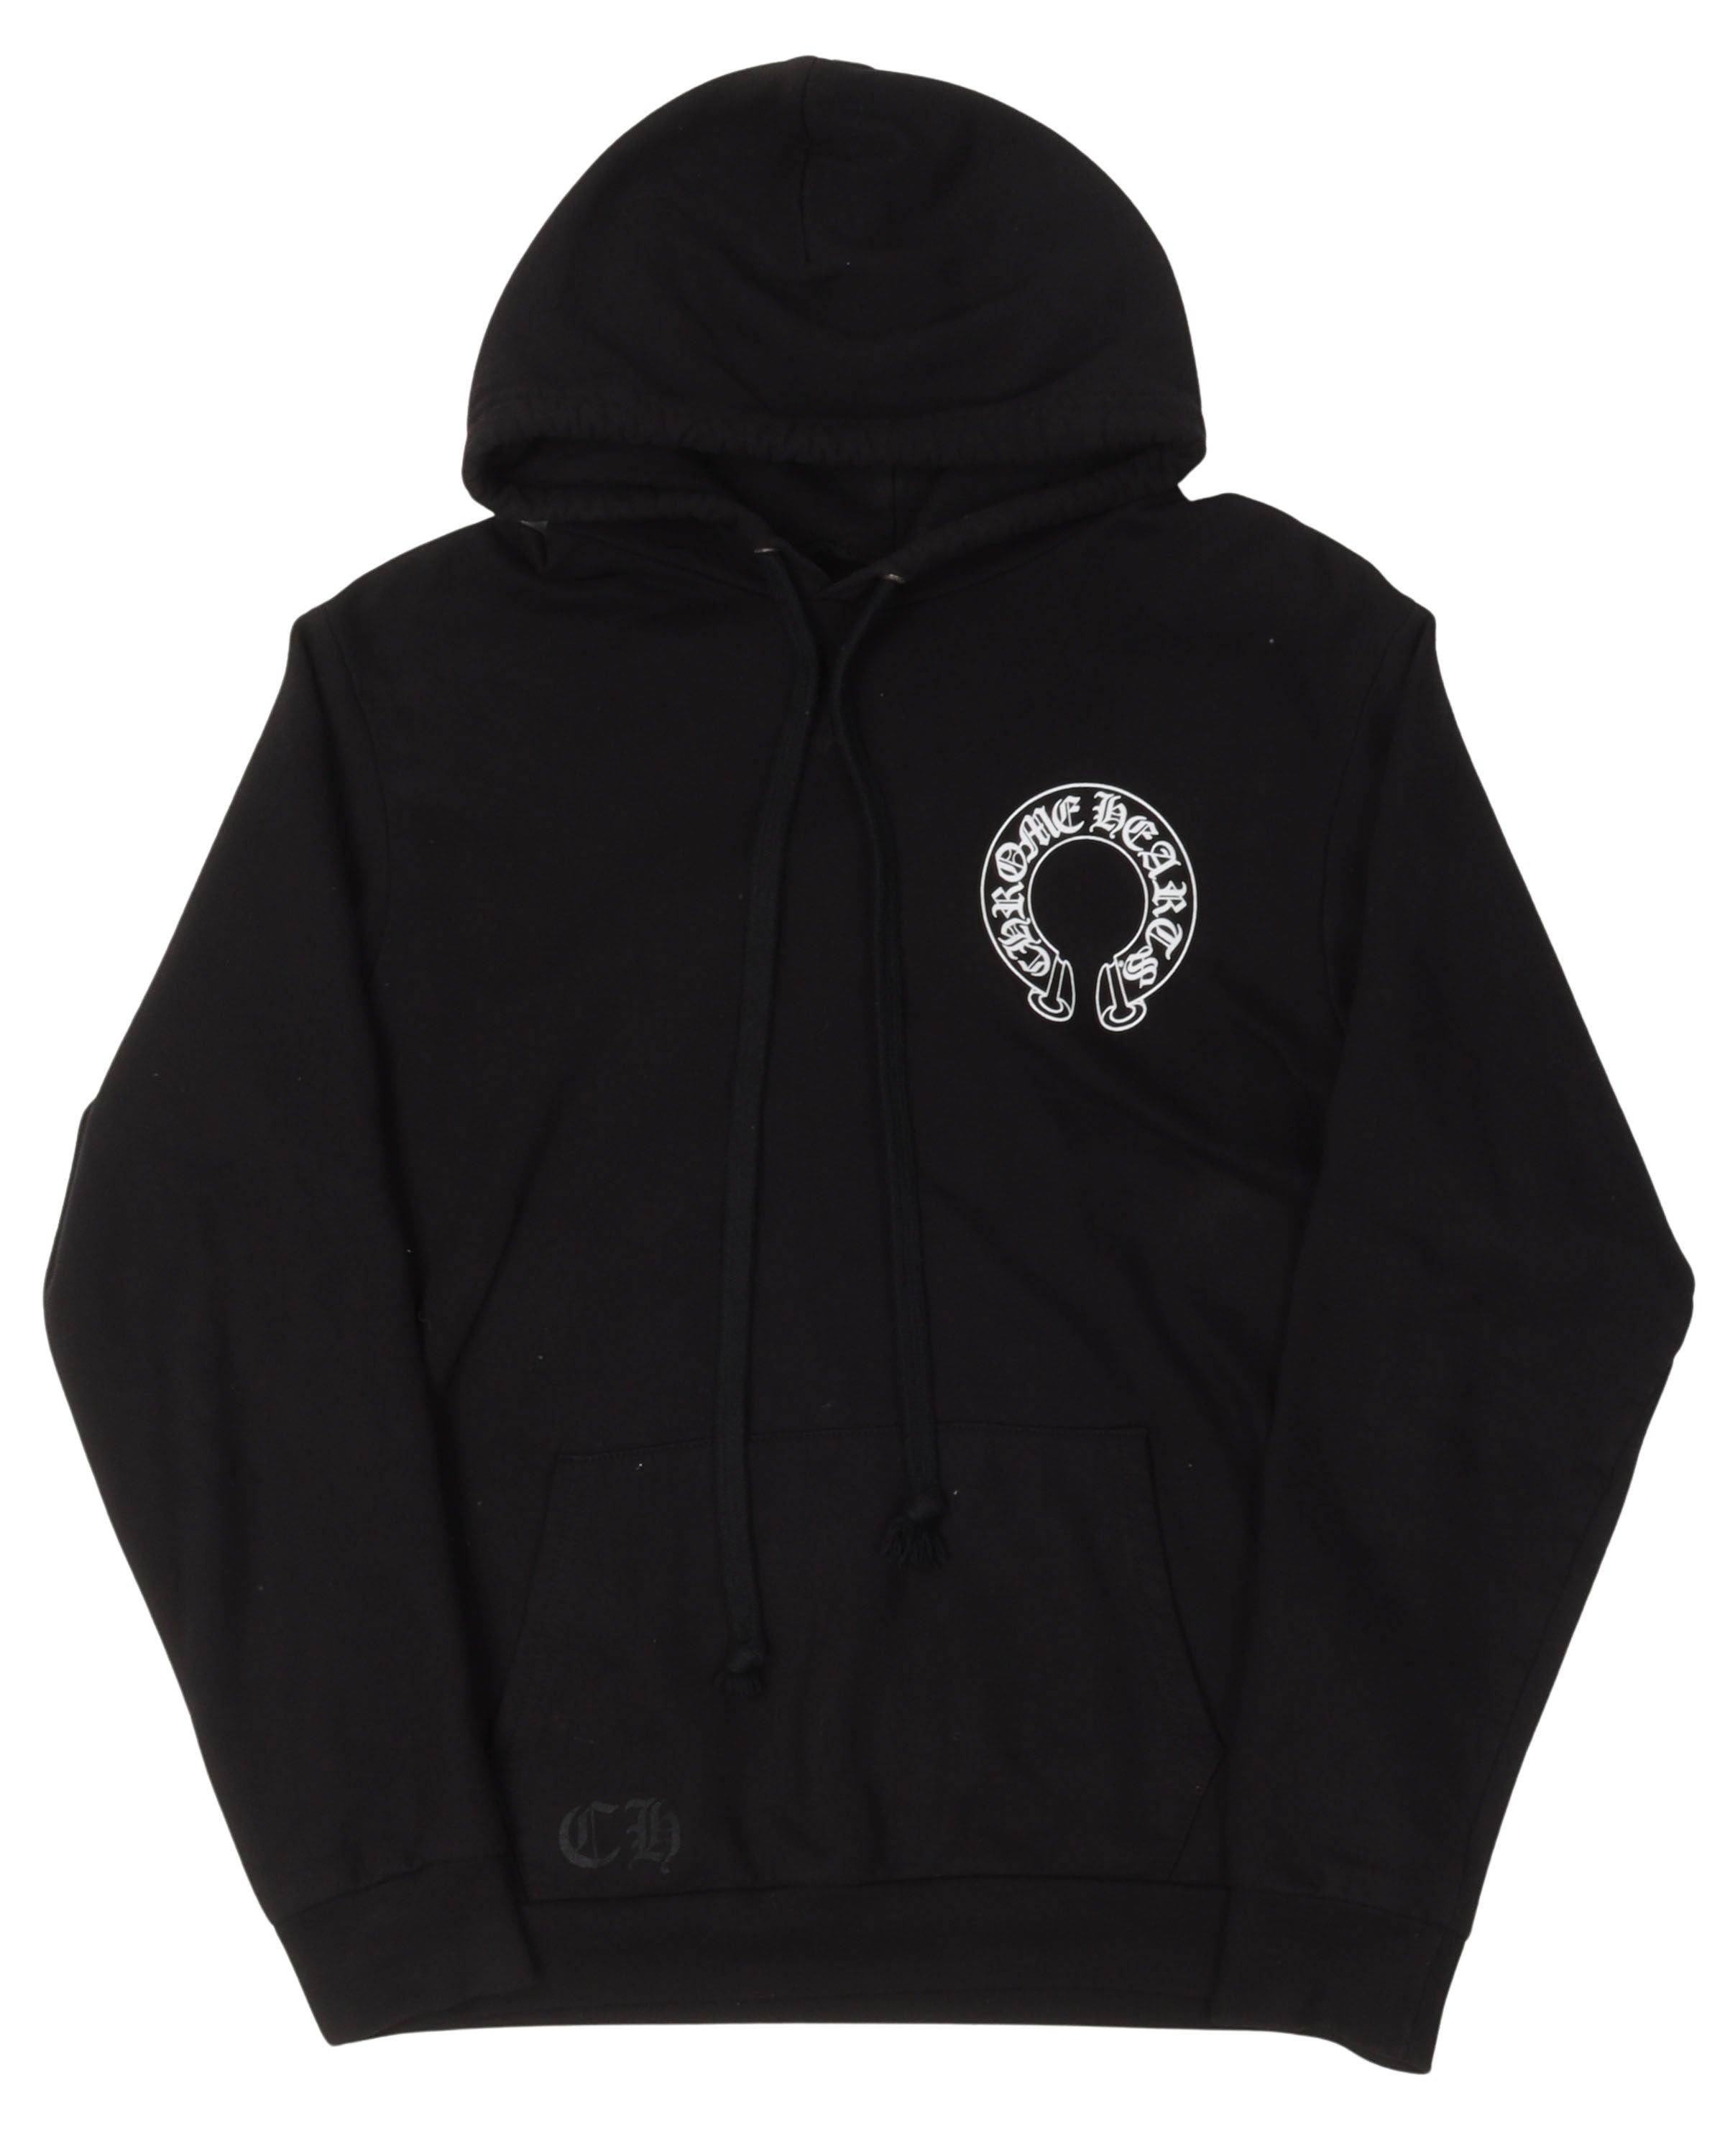 Matty Boy "Pussy and Chrome Hearts" Hoodie